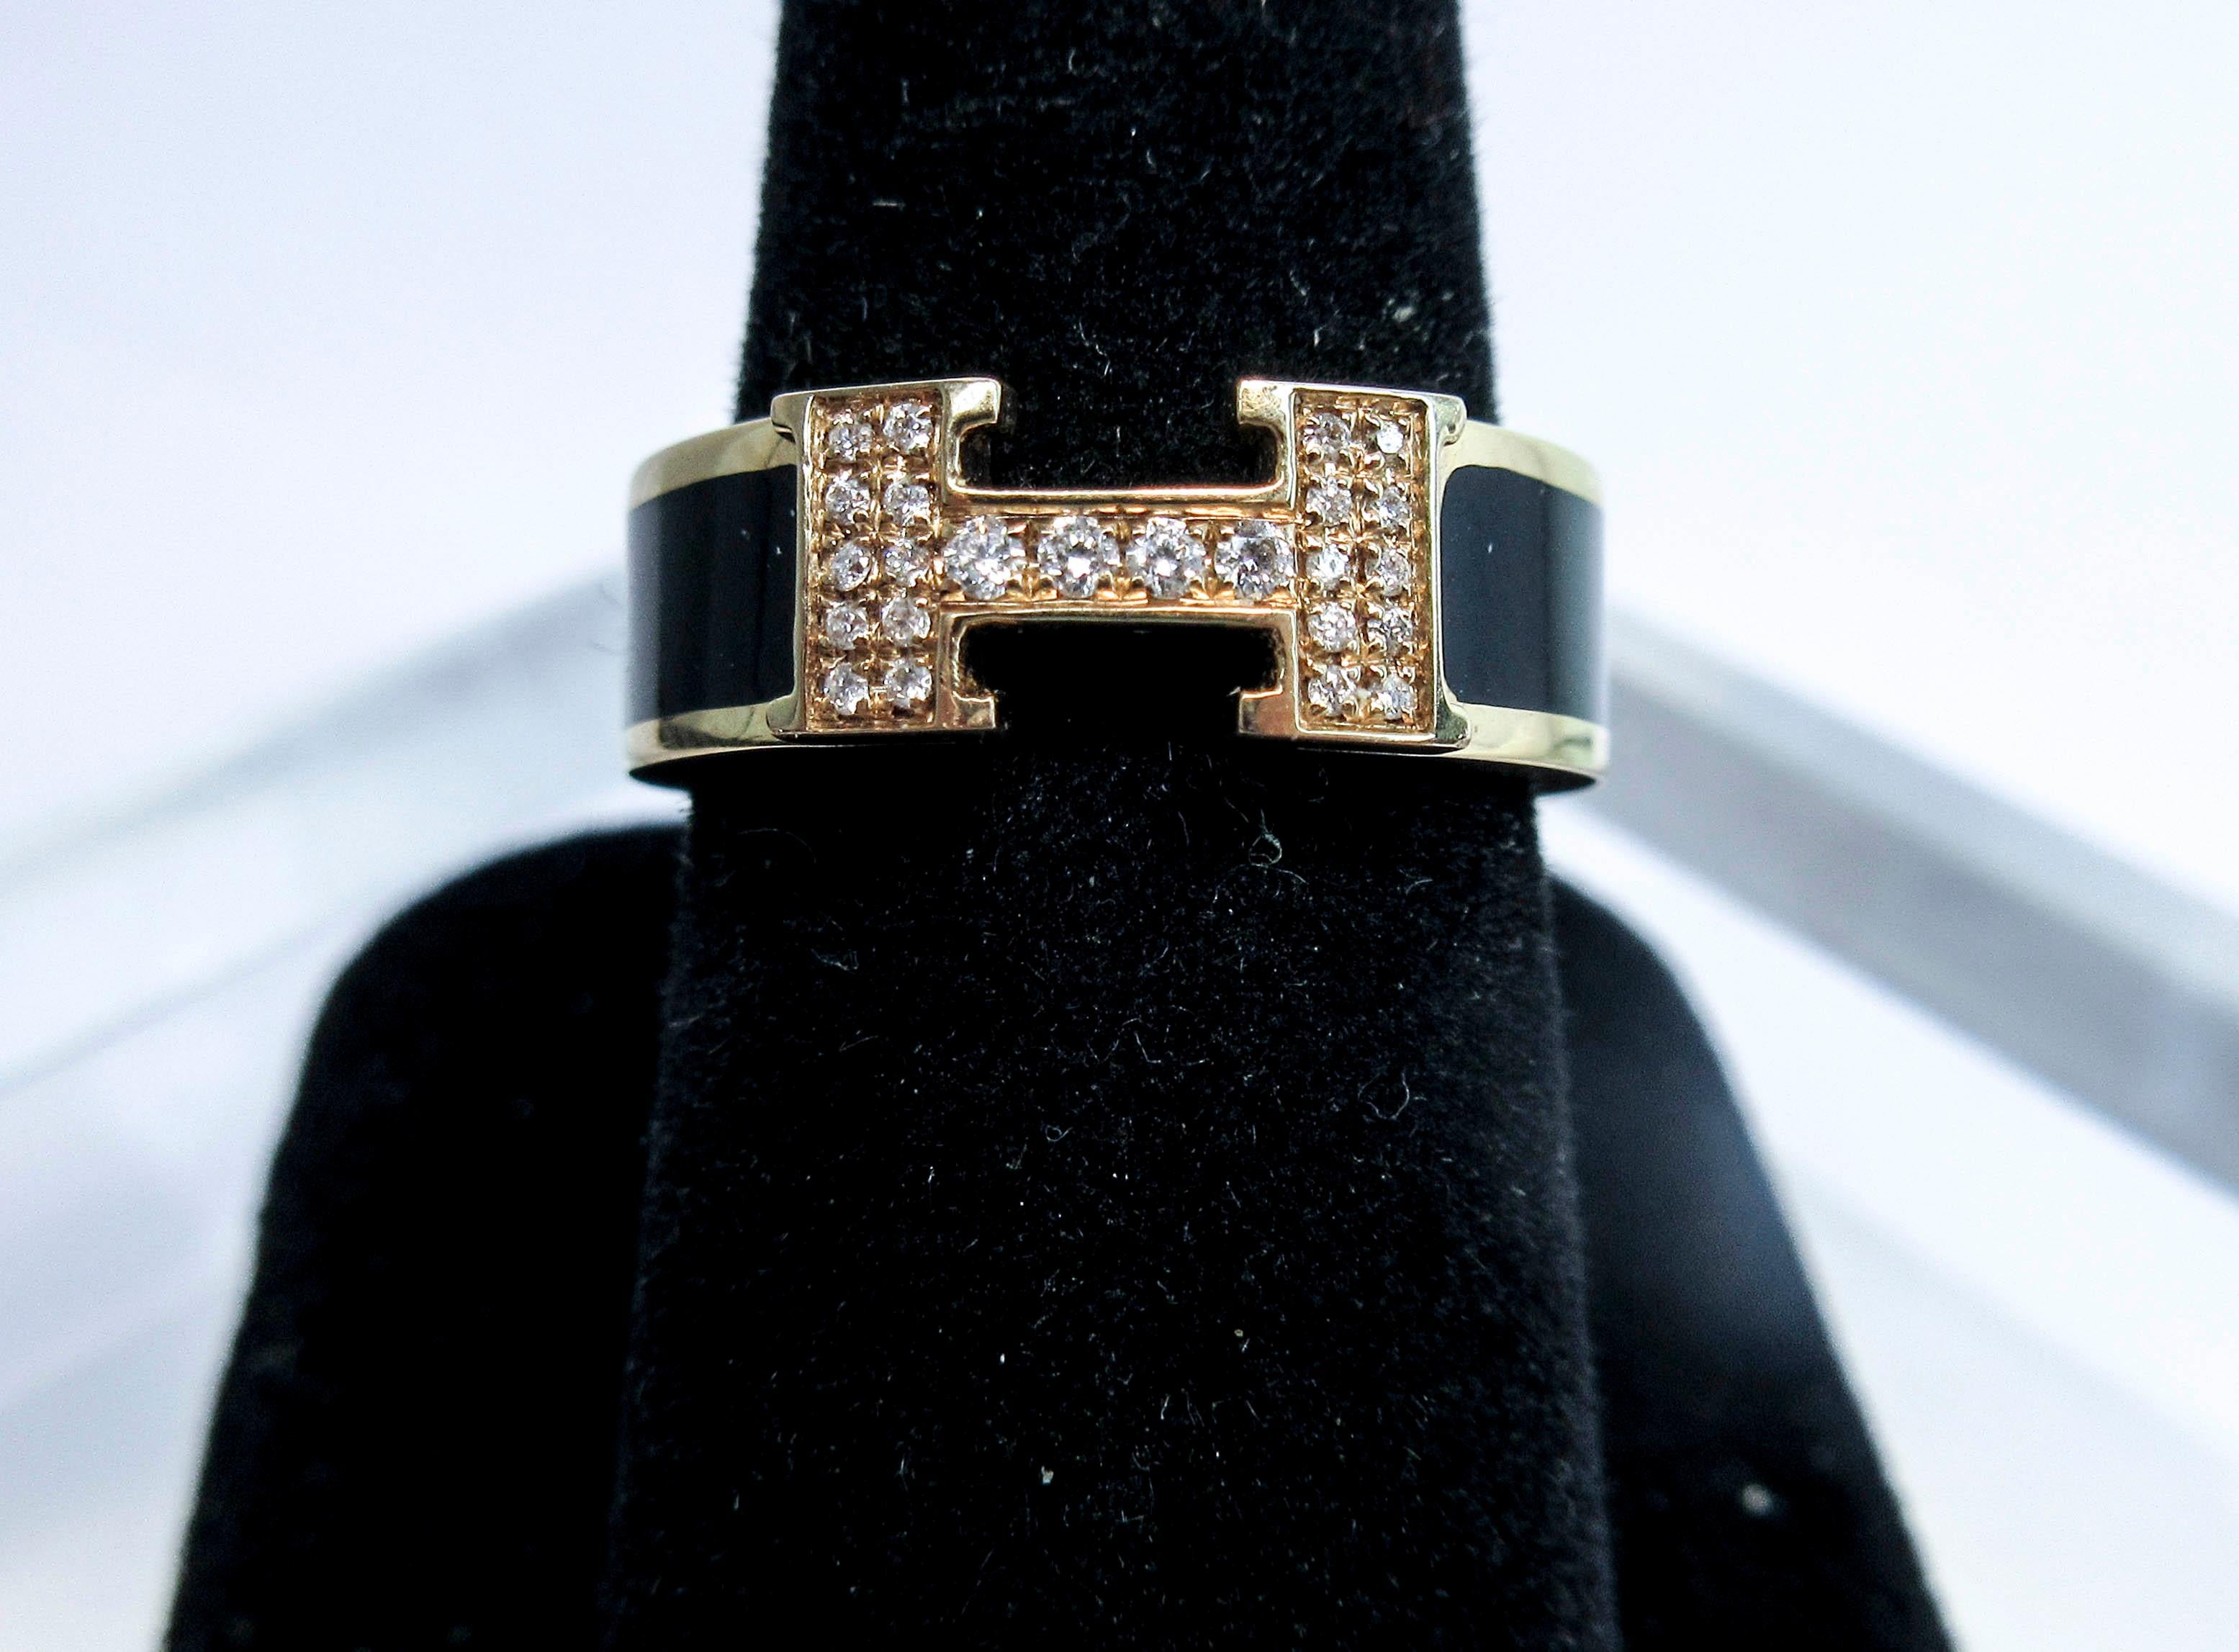 This Hermes ring is composed of 18kt rose gold with black enamel, and features a diamond pave 'H' classic design. Size 6.5. Please feel free to ask any additional you may have. 